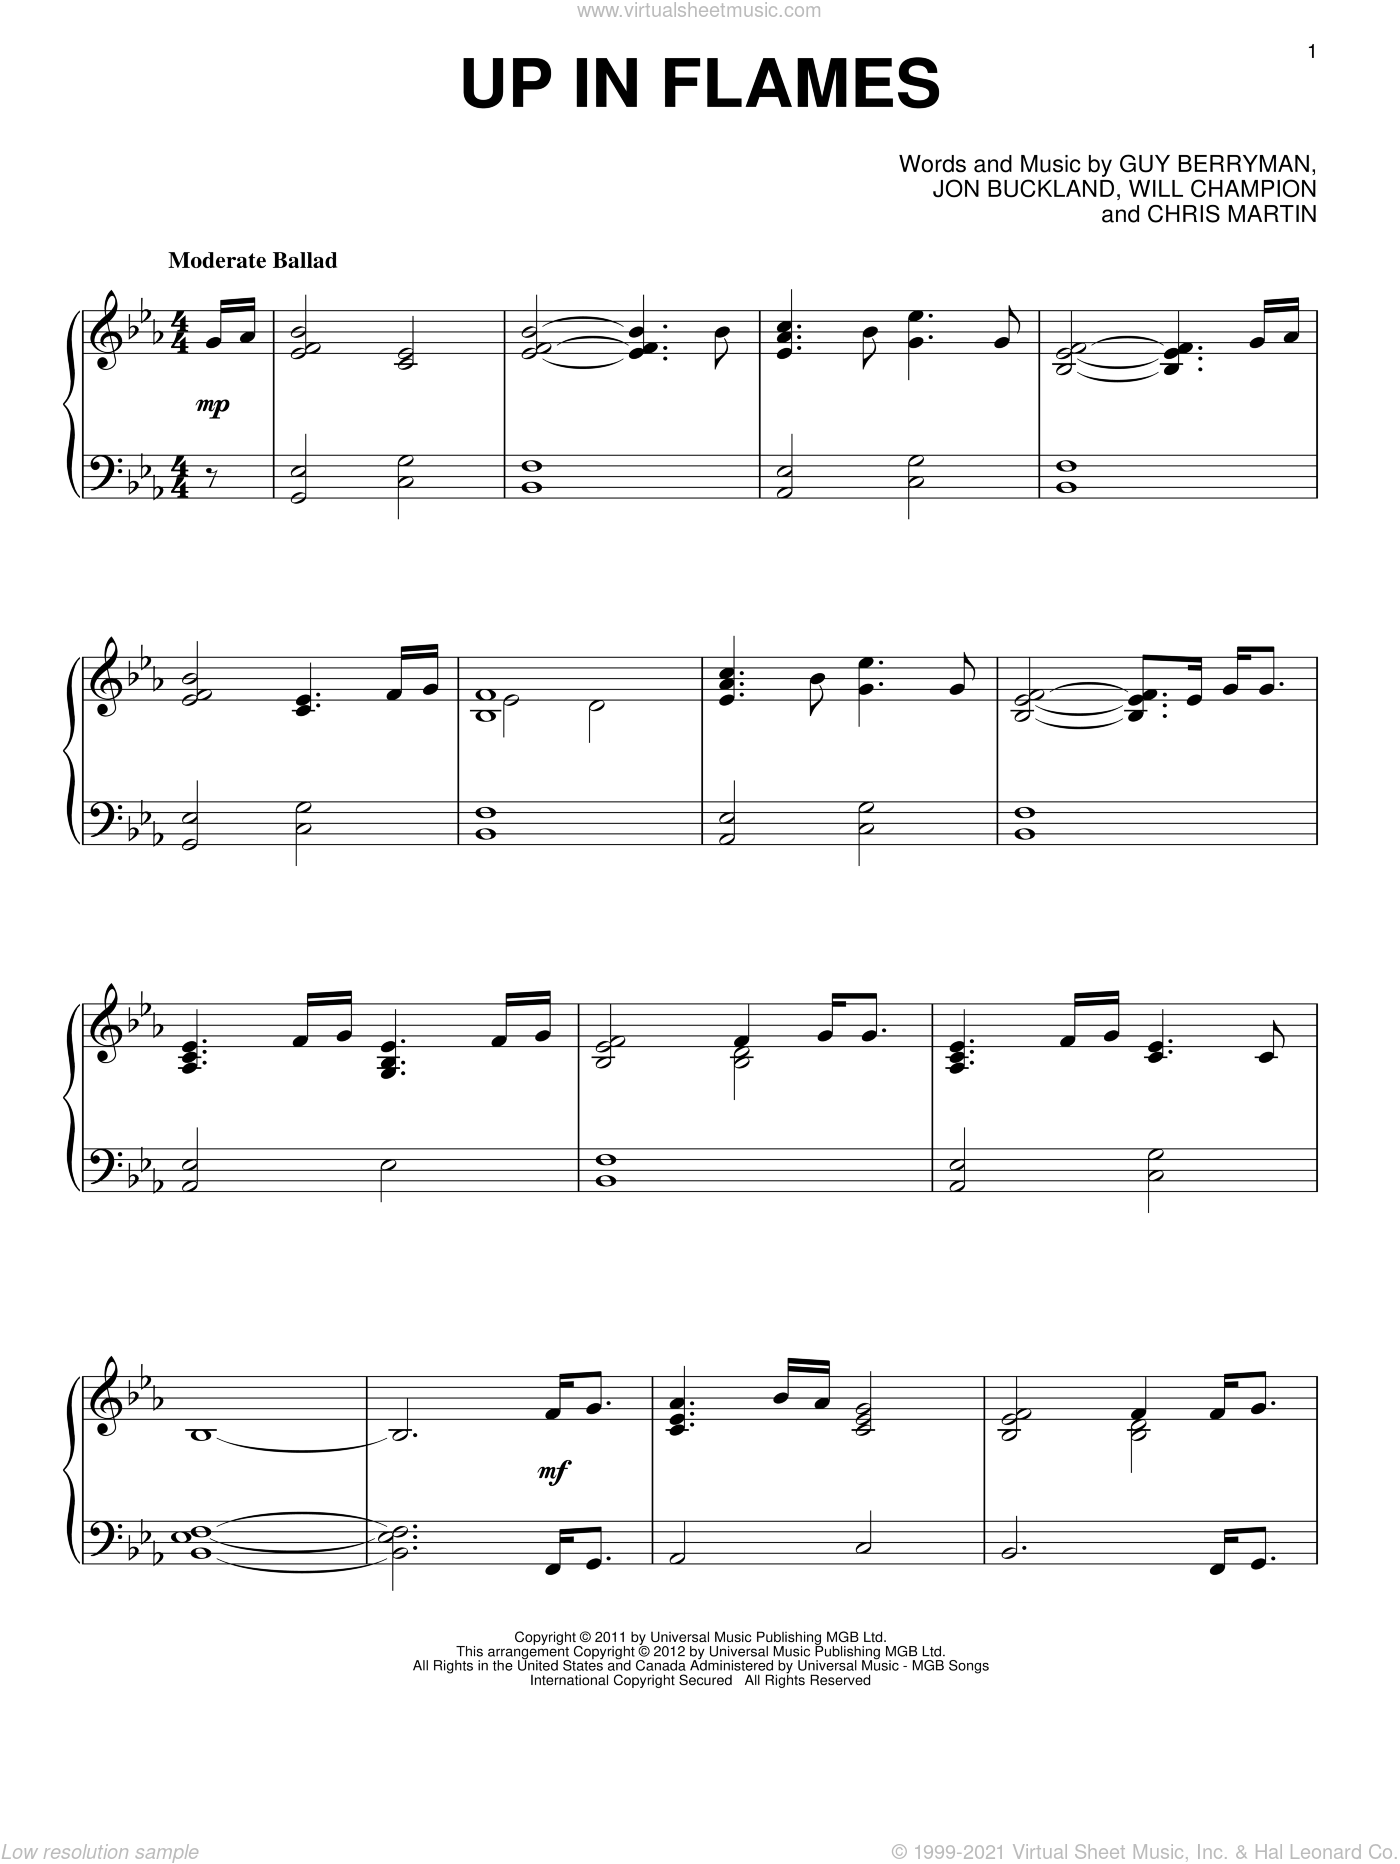 Coldplay - Up In Flames sheet music for piano solo [PDF]